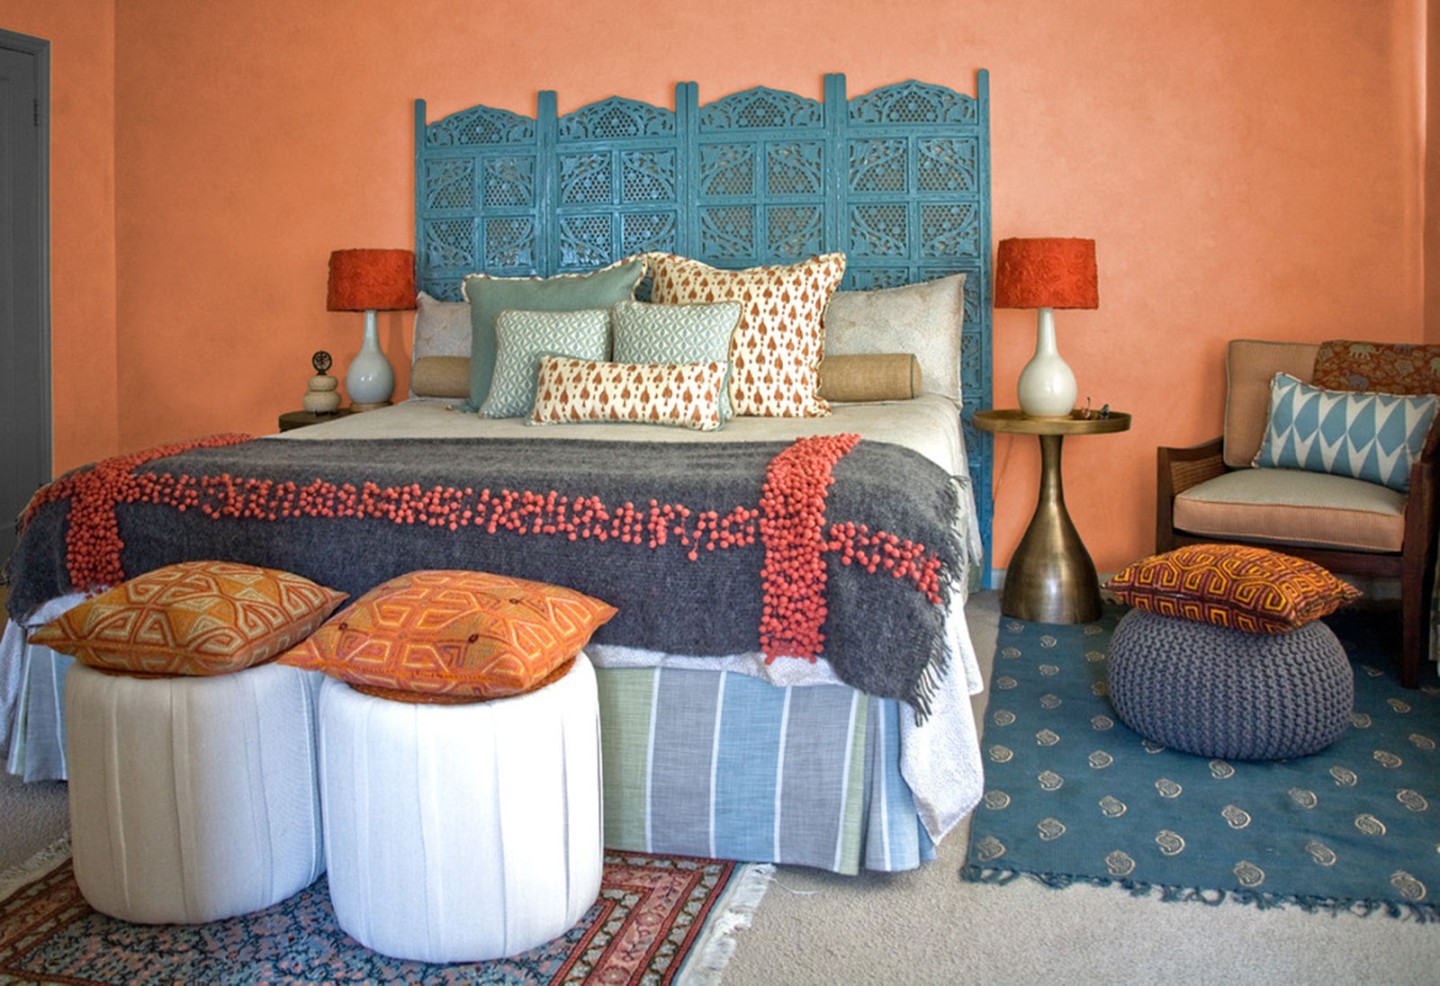 Decorating Your Bedroom With Orange: Ideas & Tips  LoveToKnow